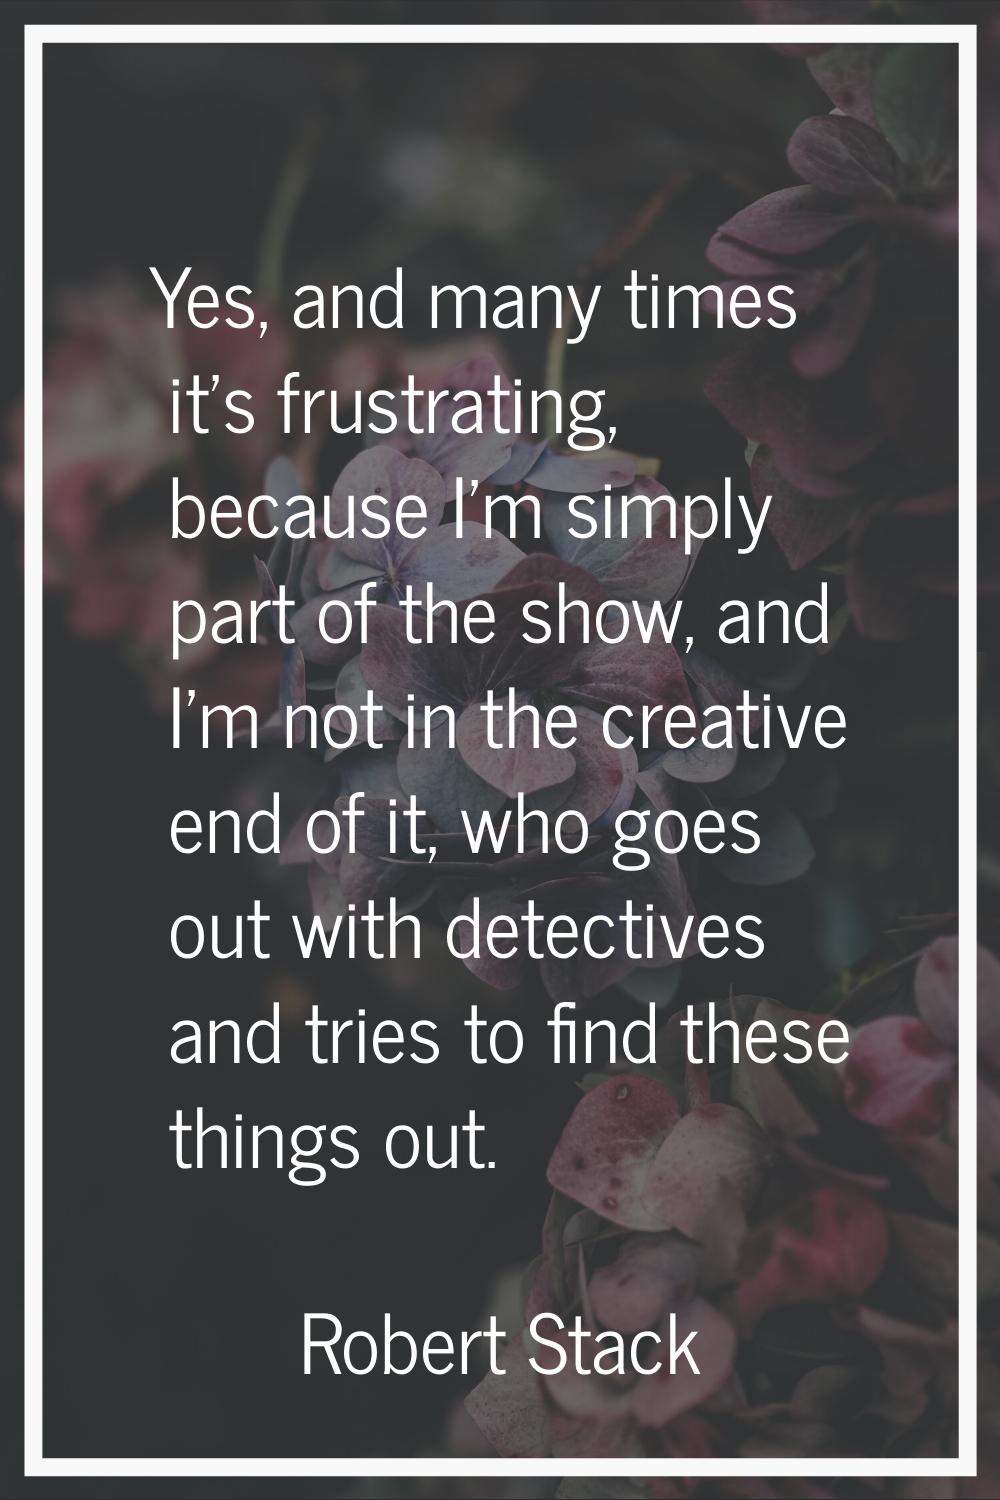 Yes, and many times it's frustrating, because I'm simply part of the show, and I'm not in the creat